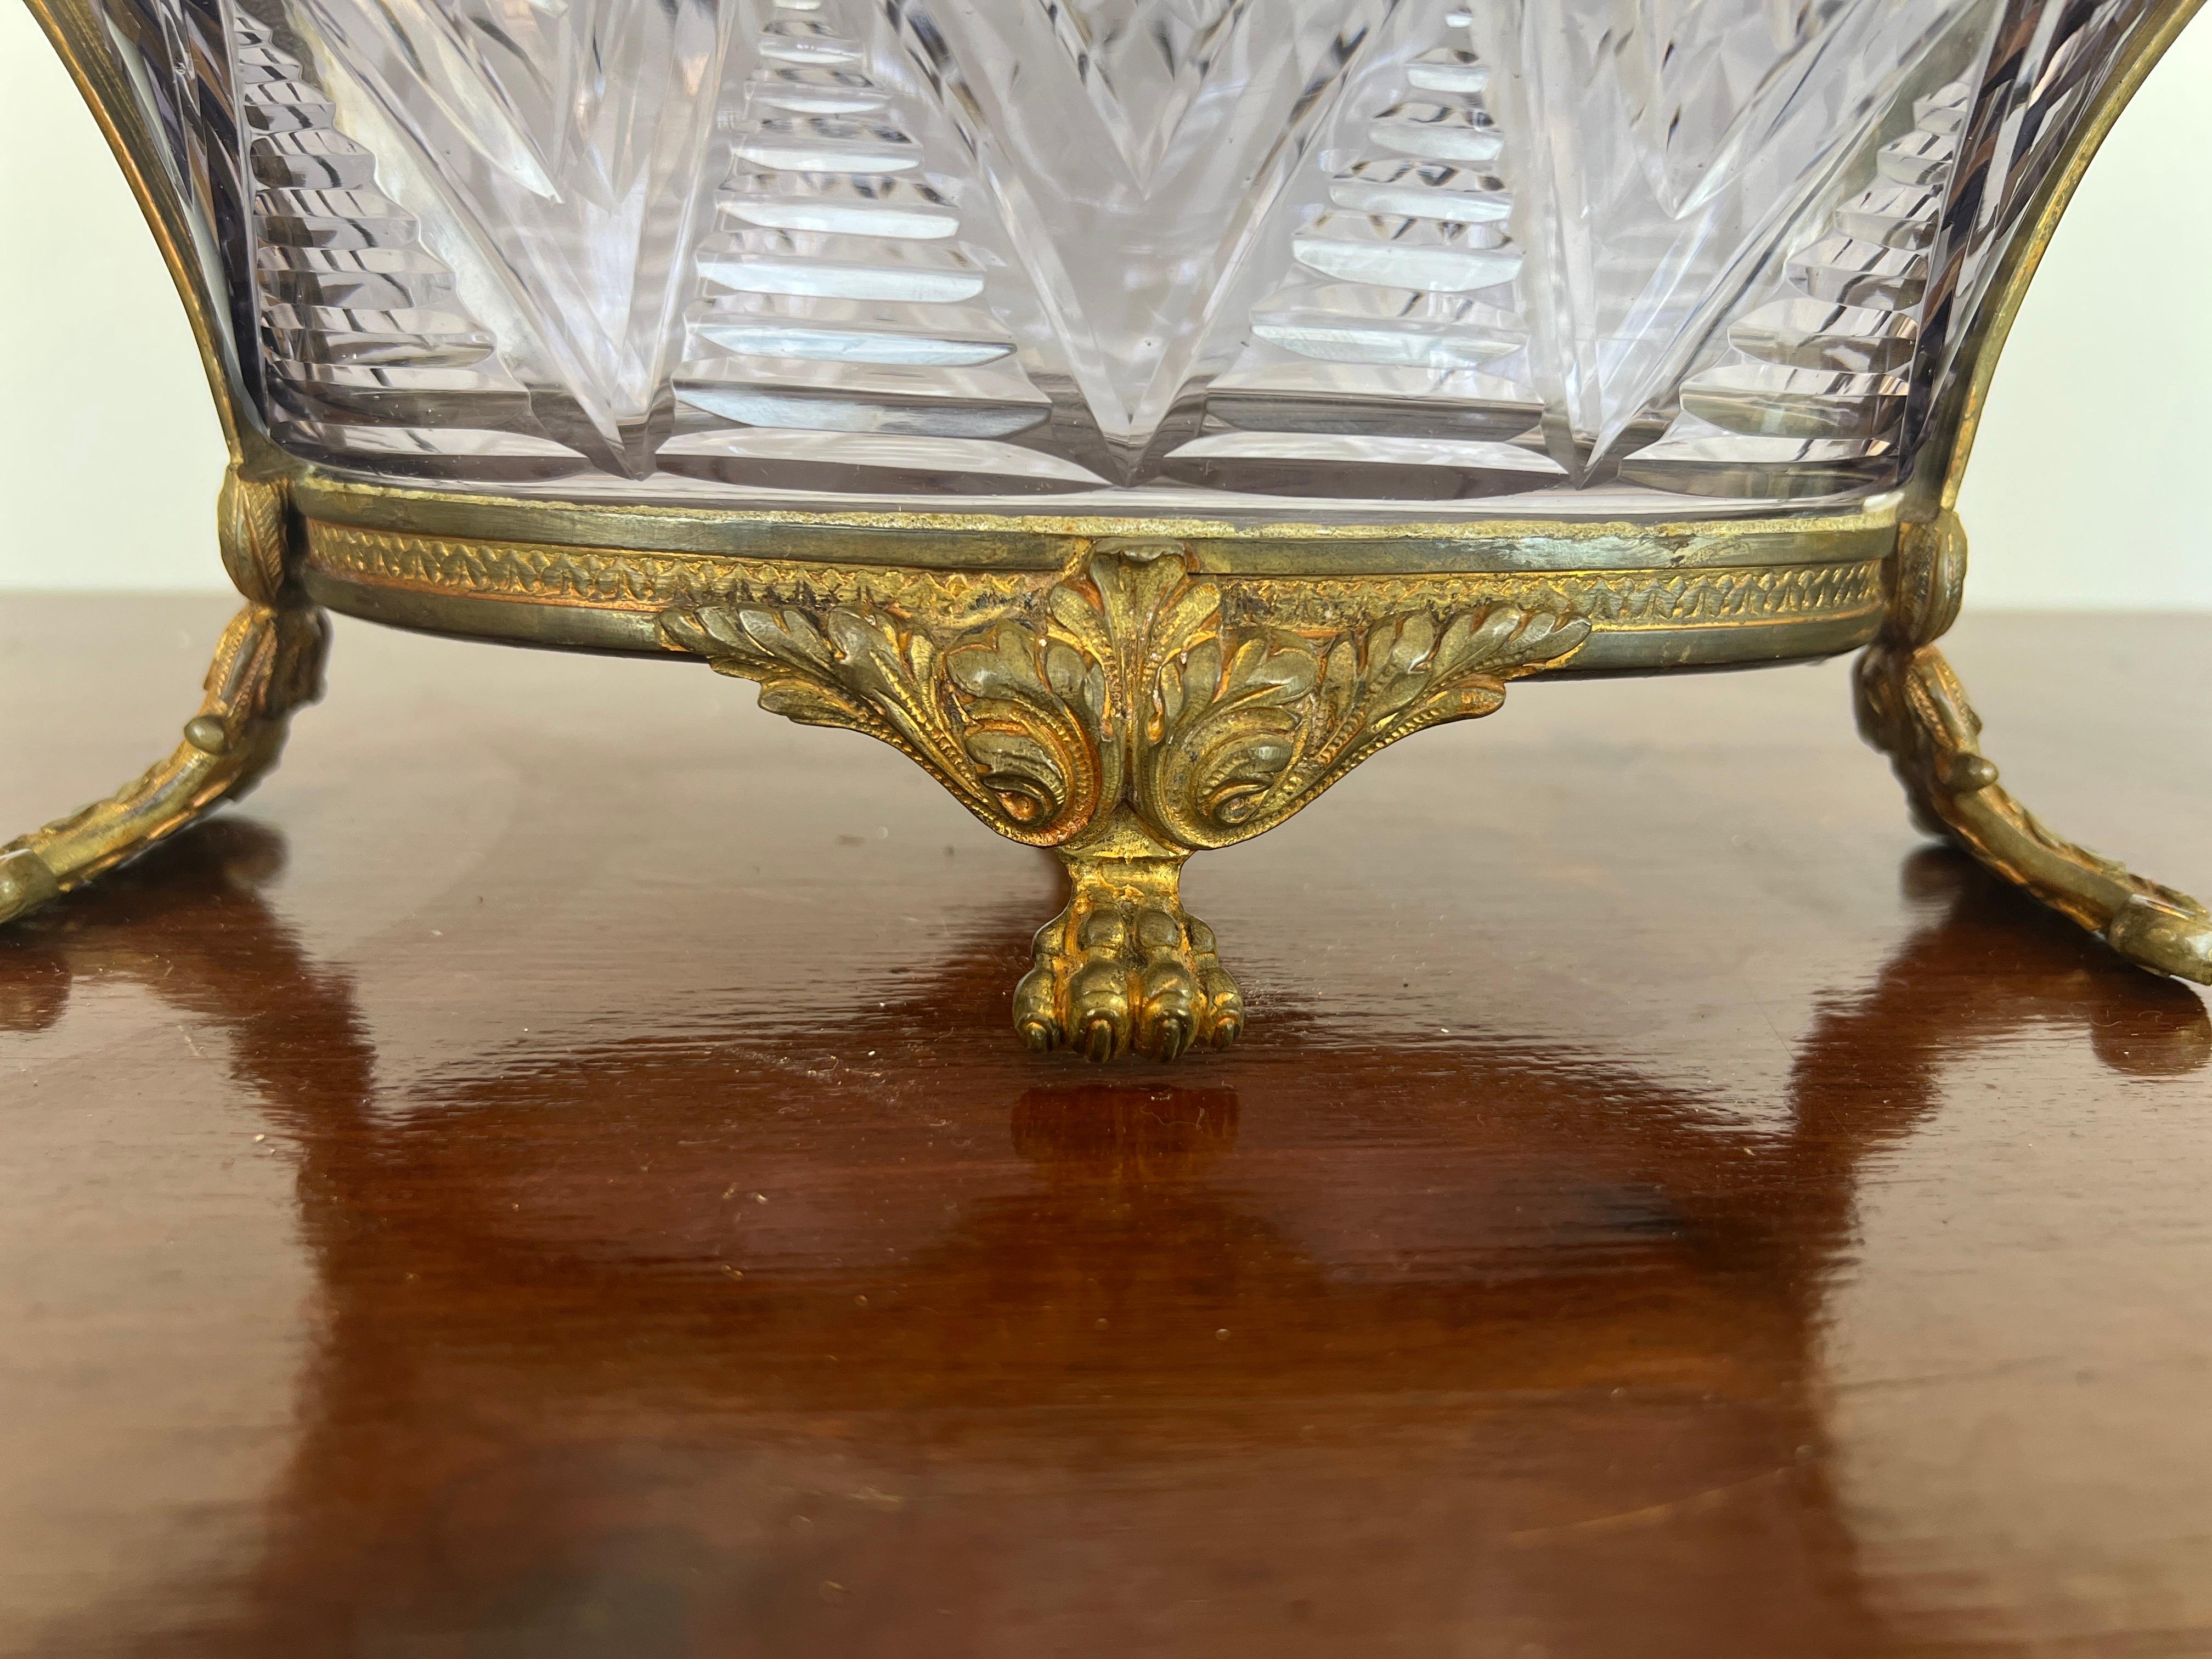 Bronze Antique French Baccarat Amethyst Glass and Ormolu Mounted Centerpiece Bowl For Sale